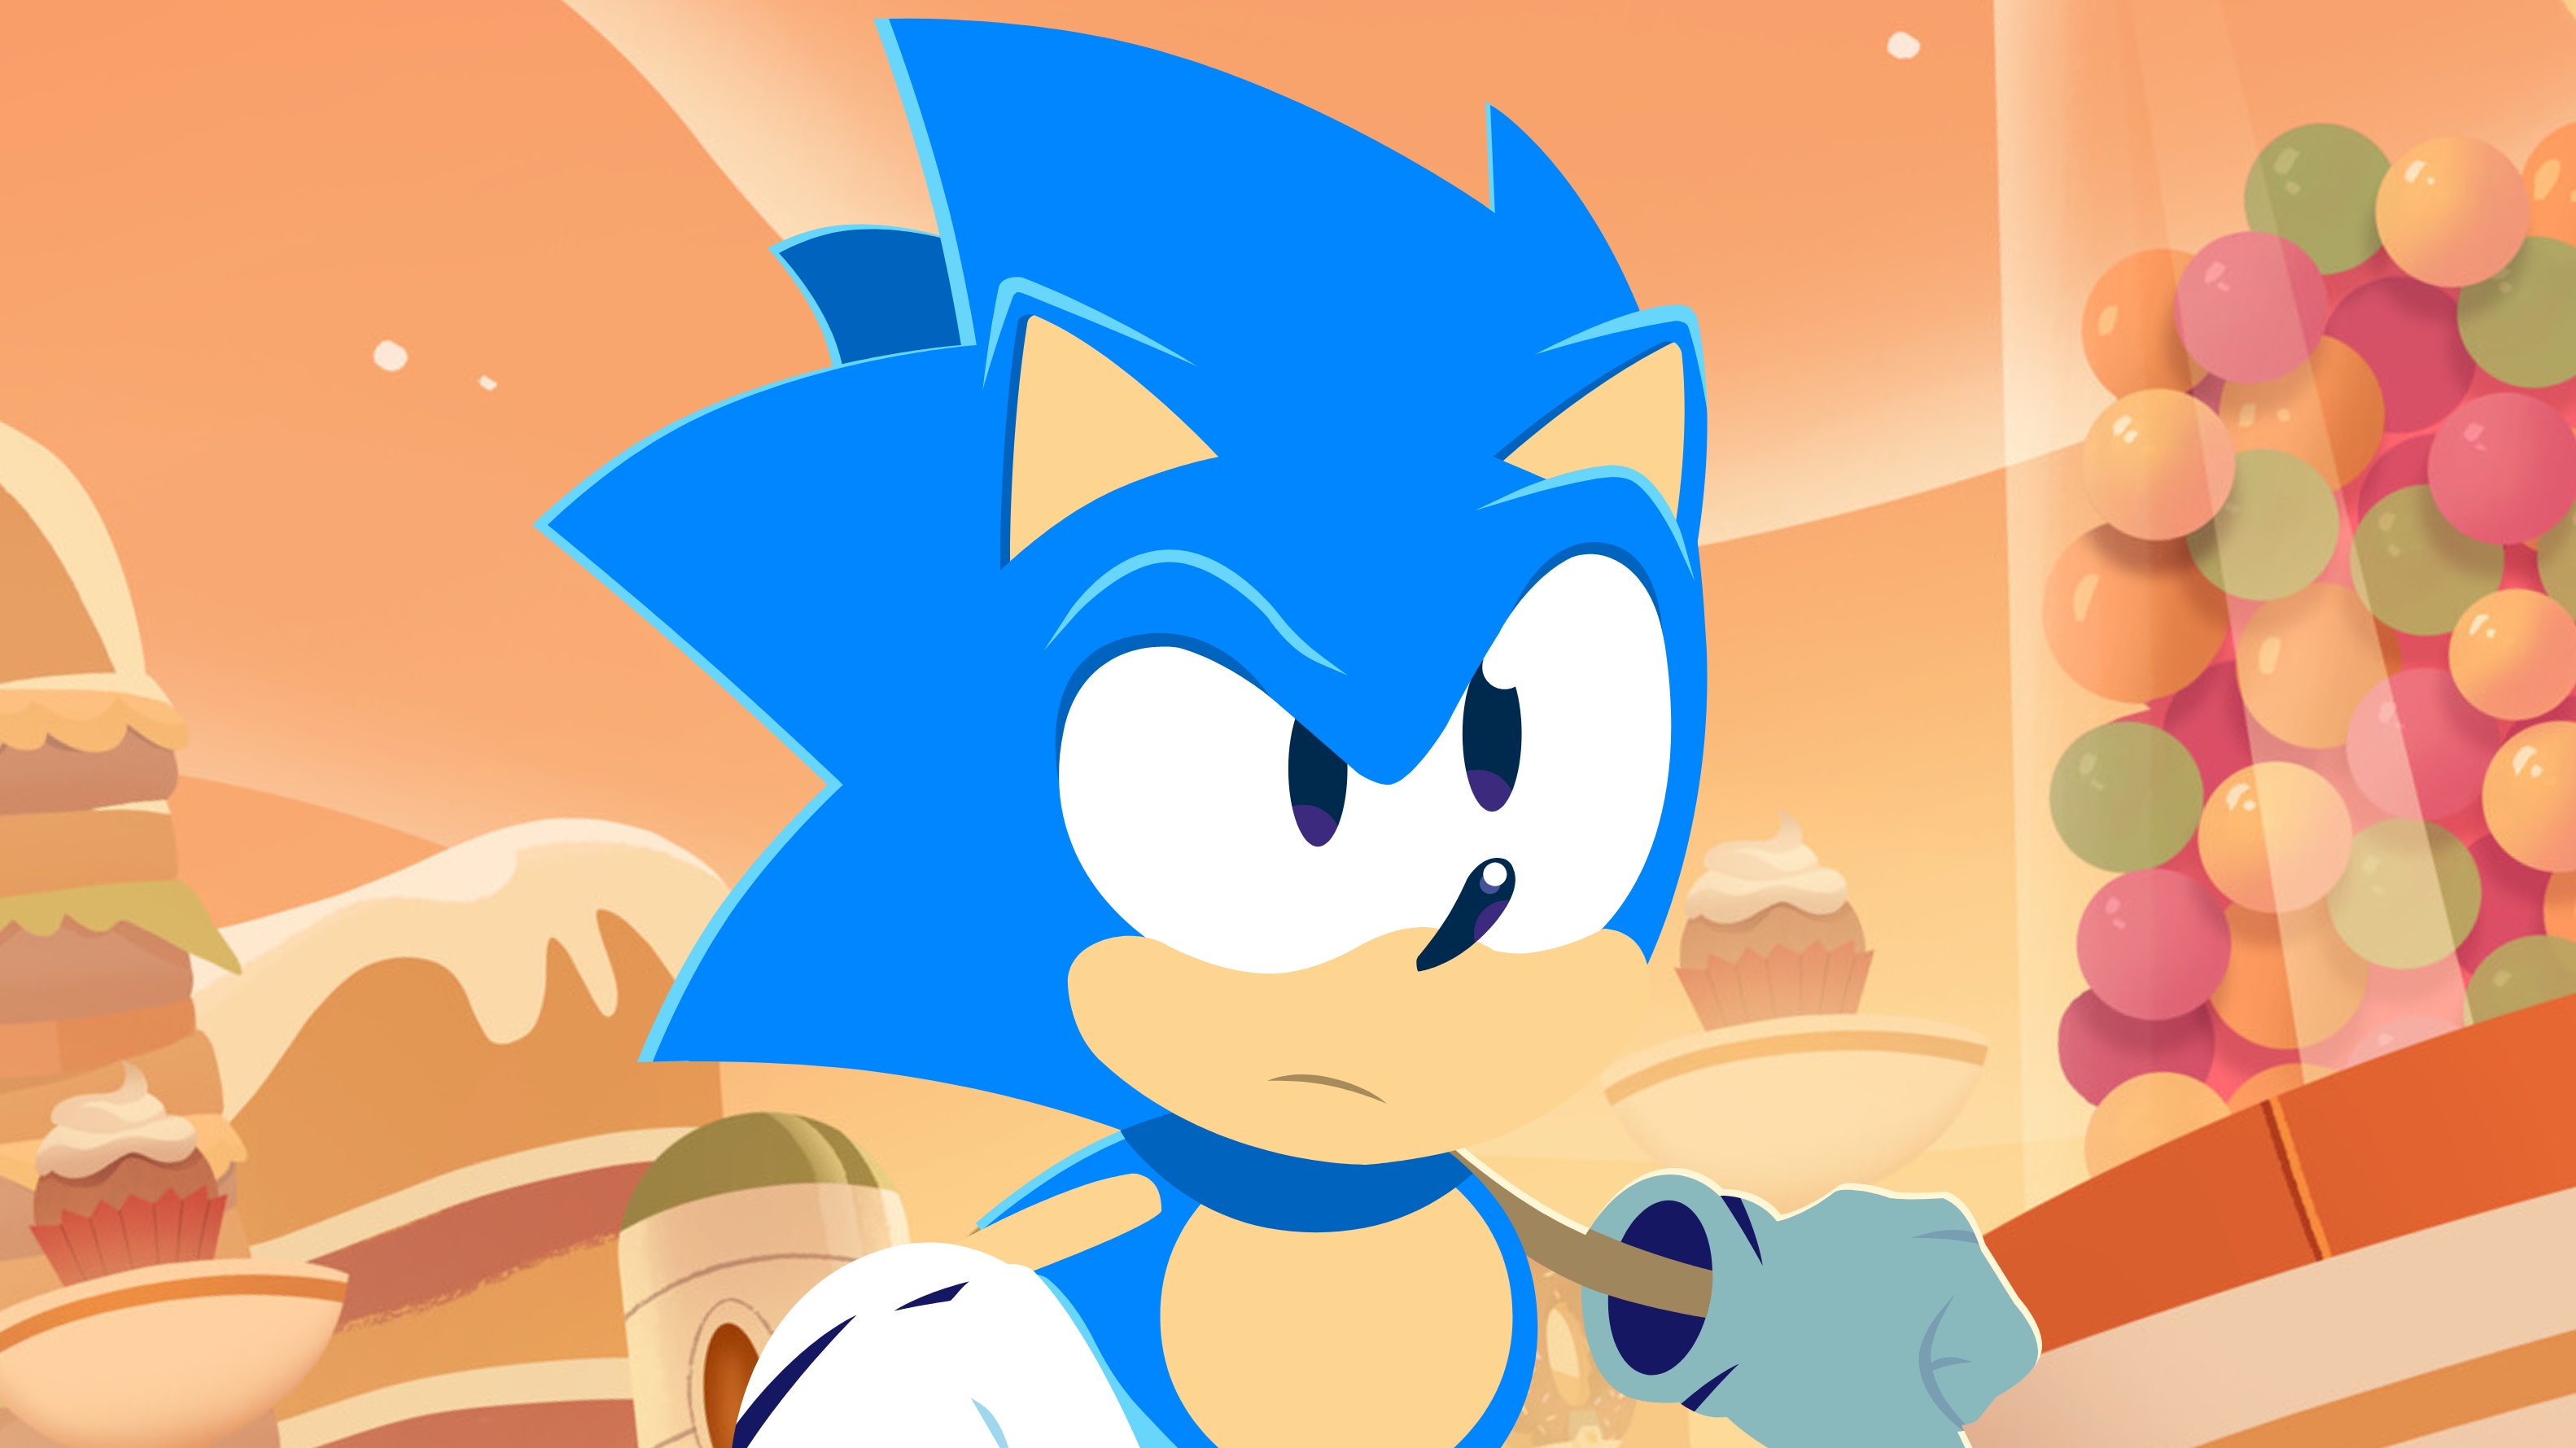 Spin on X: a new Classic Sonic render based on the Mania (special